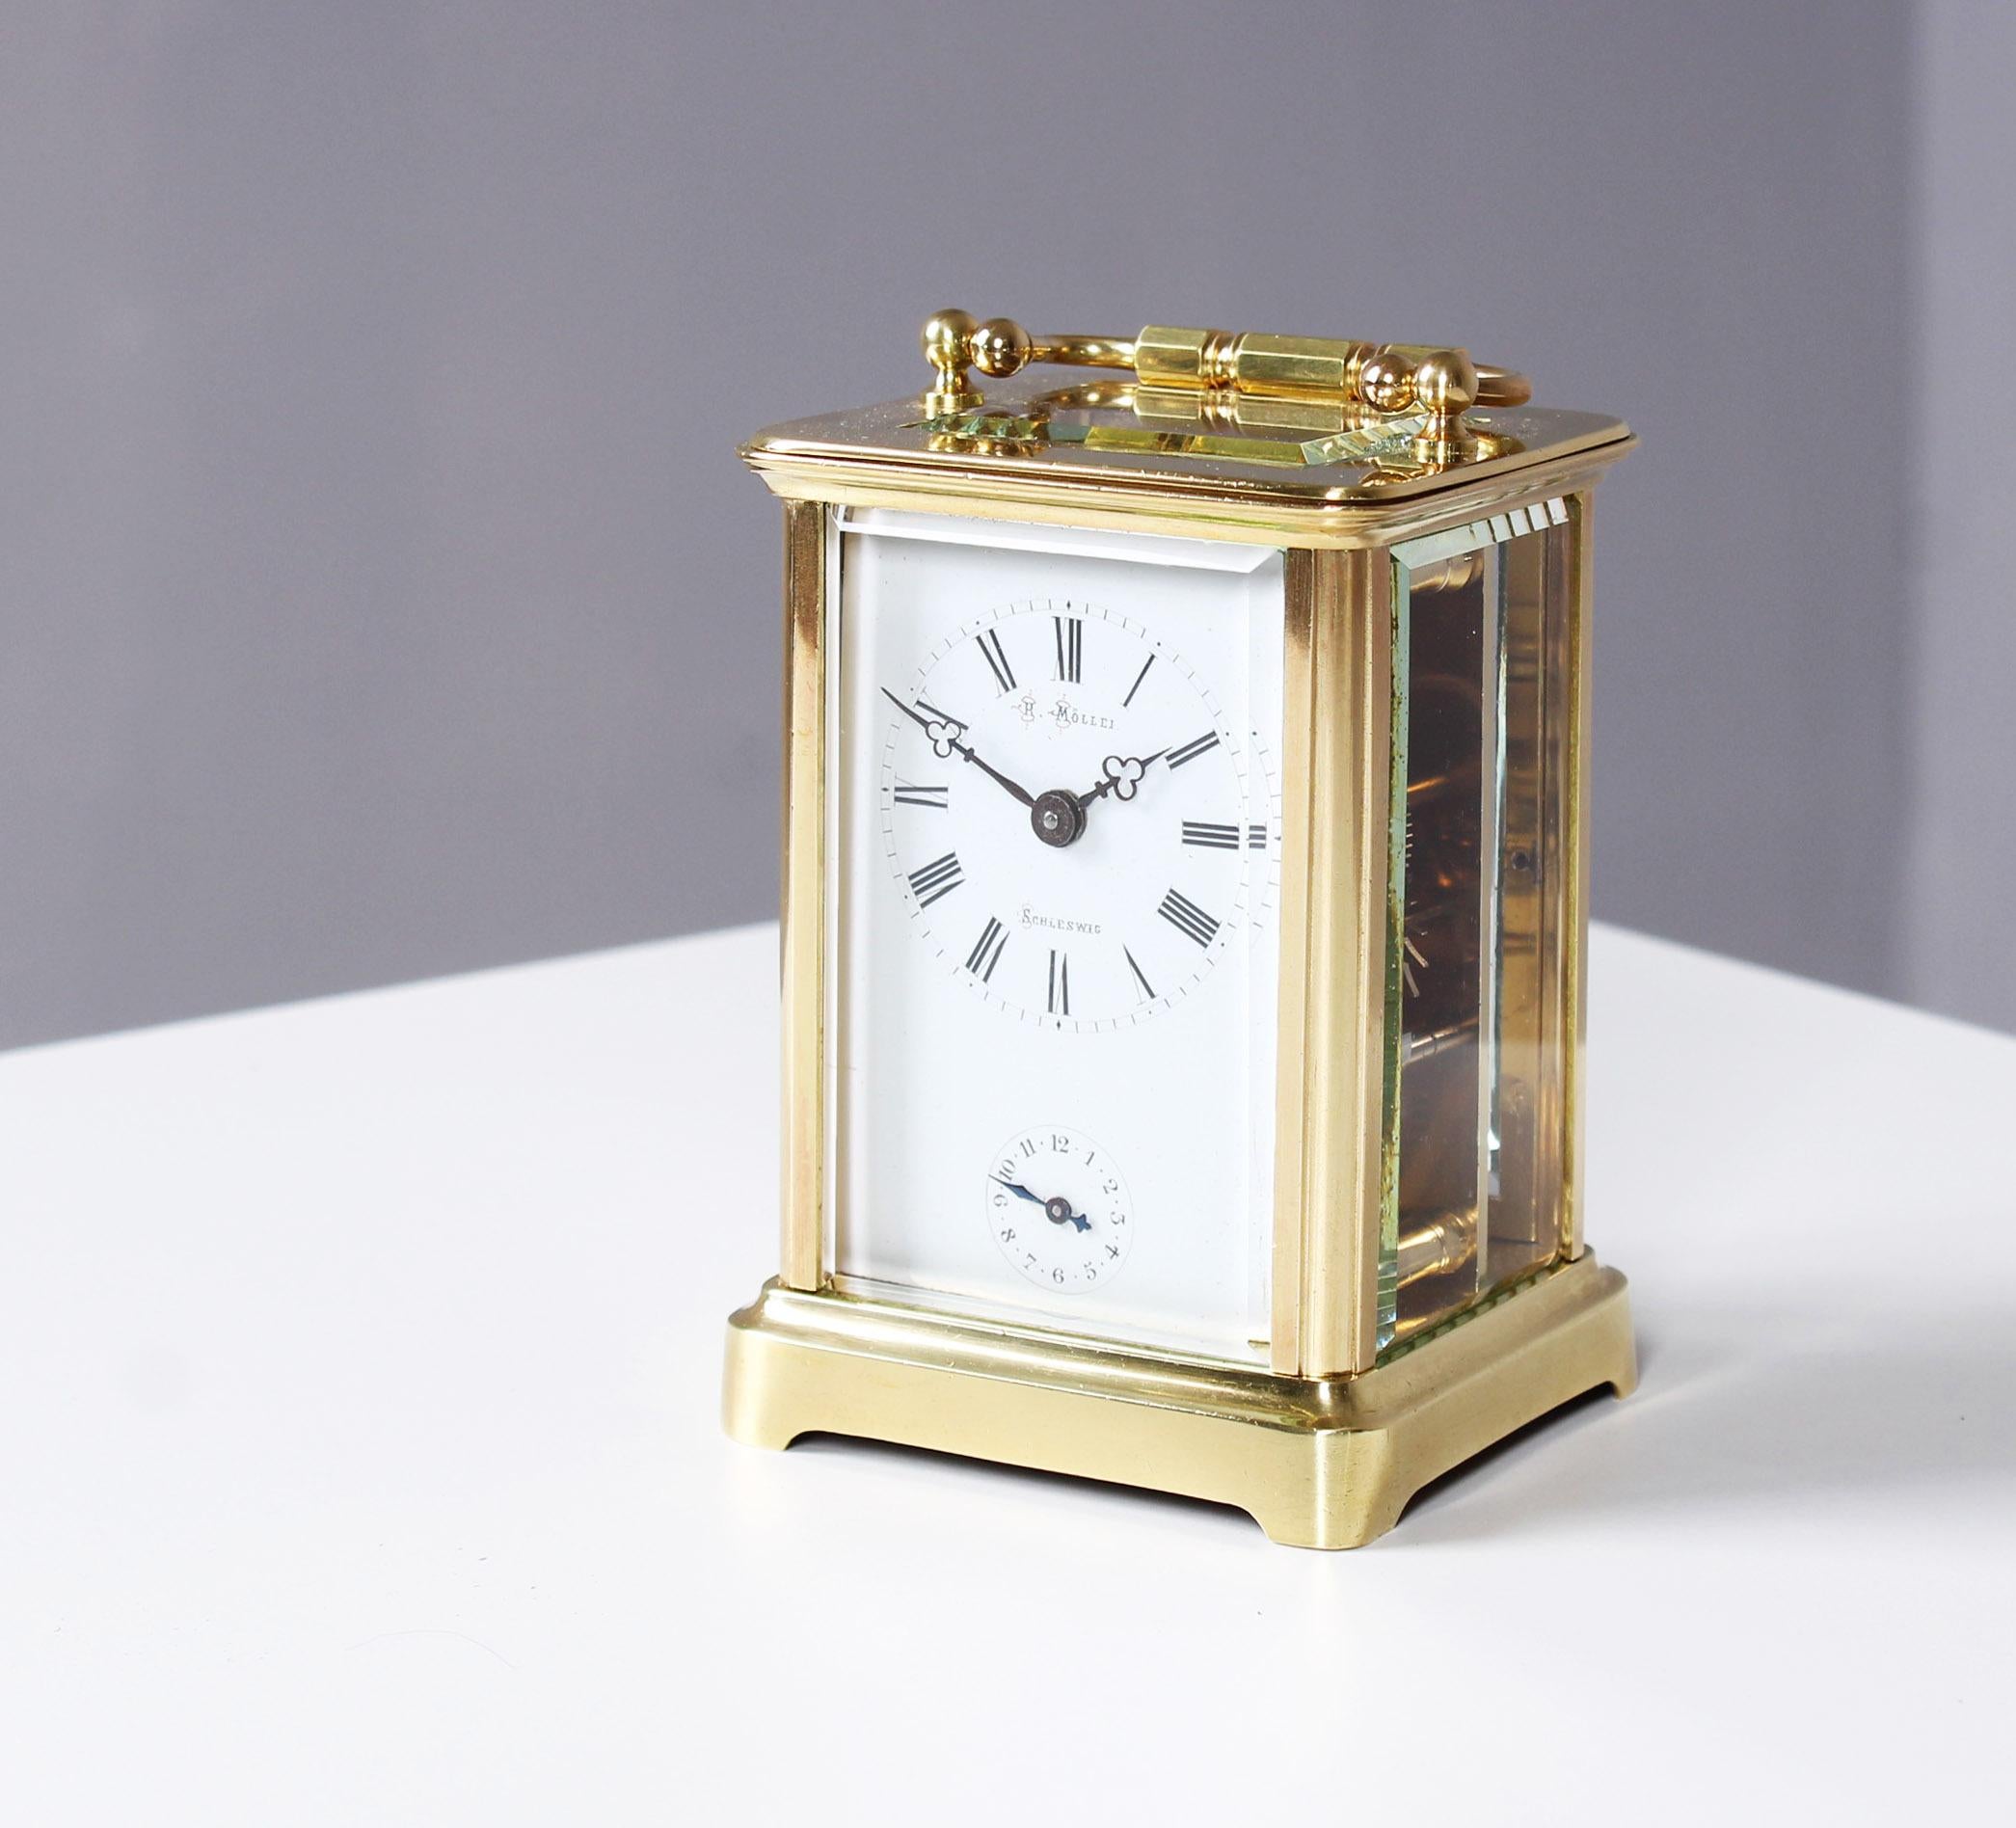 Signed travel alarm clock, carriage clock

France
Brass, enamel,
circa 1900

Dimensions: H x W x D: 11.5 x 8 x 6.5 cm


Travel alarm clock in brass case glazed on all sides.
Enamel dial with roman numerals and dealer signature: H. Möller